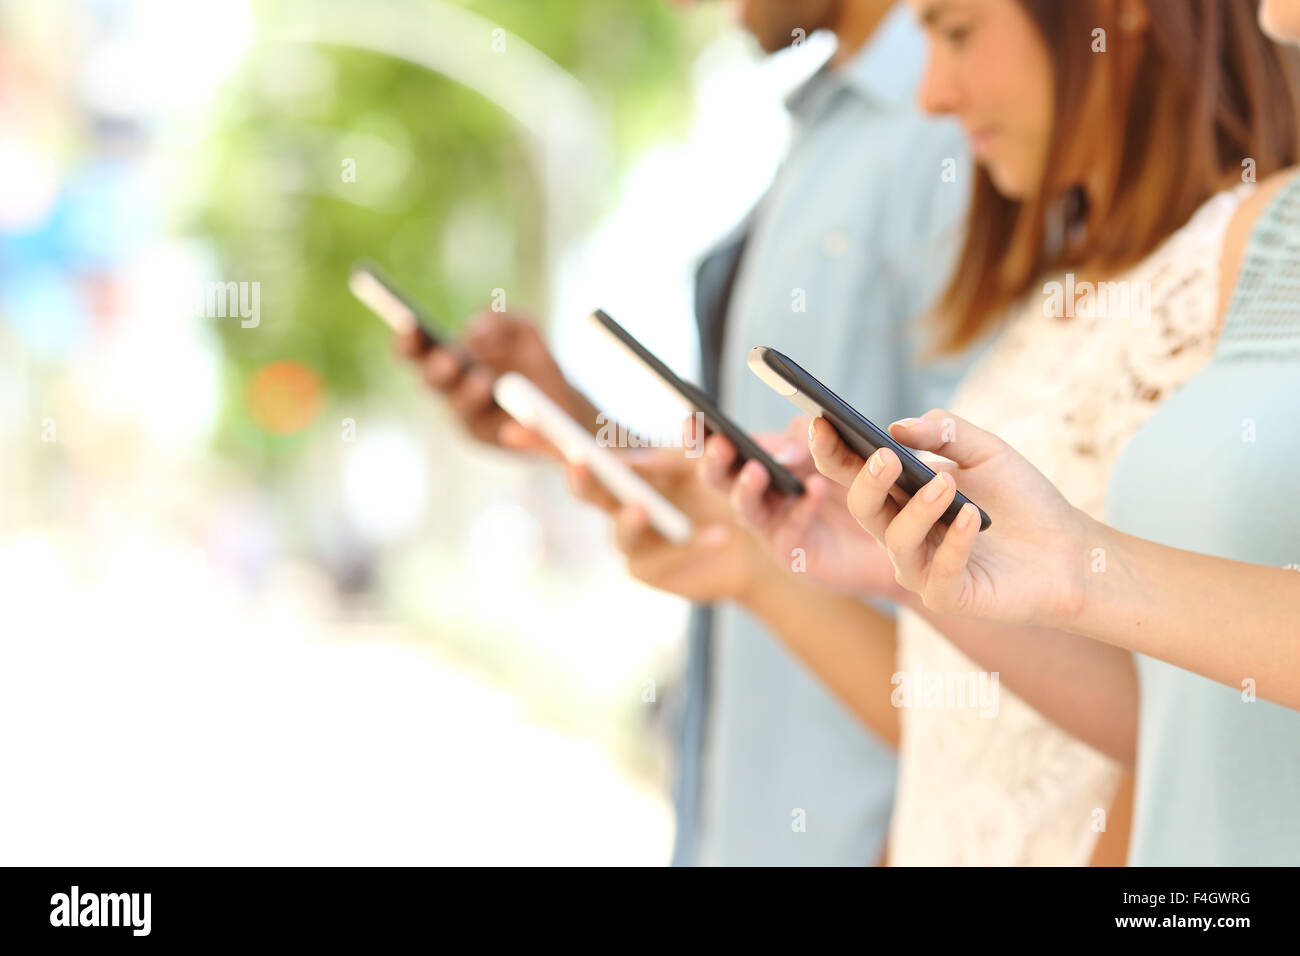 Four friend hands texting in their smart phones in the street with a blurred background Stock Photo